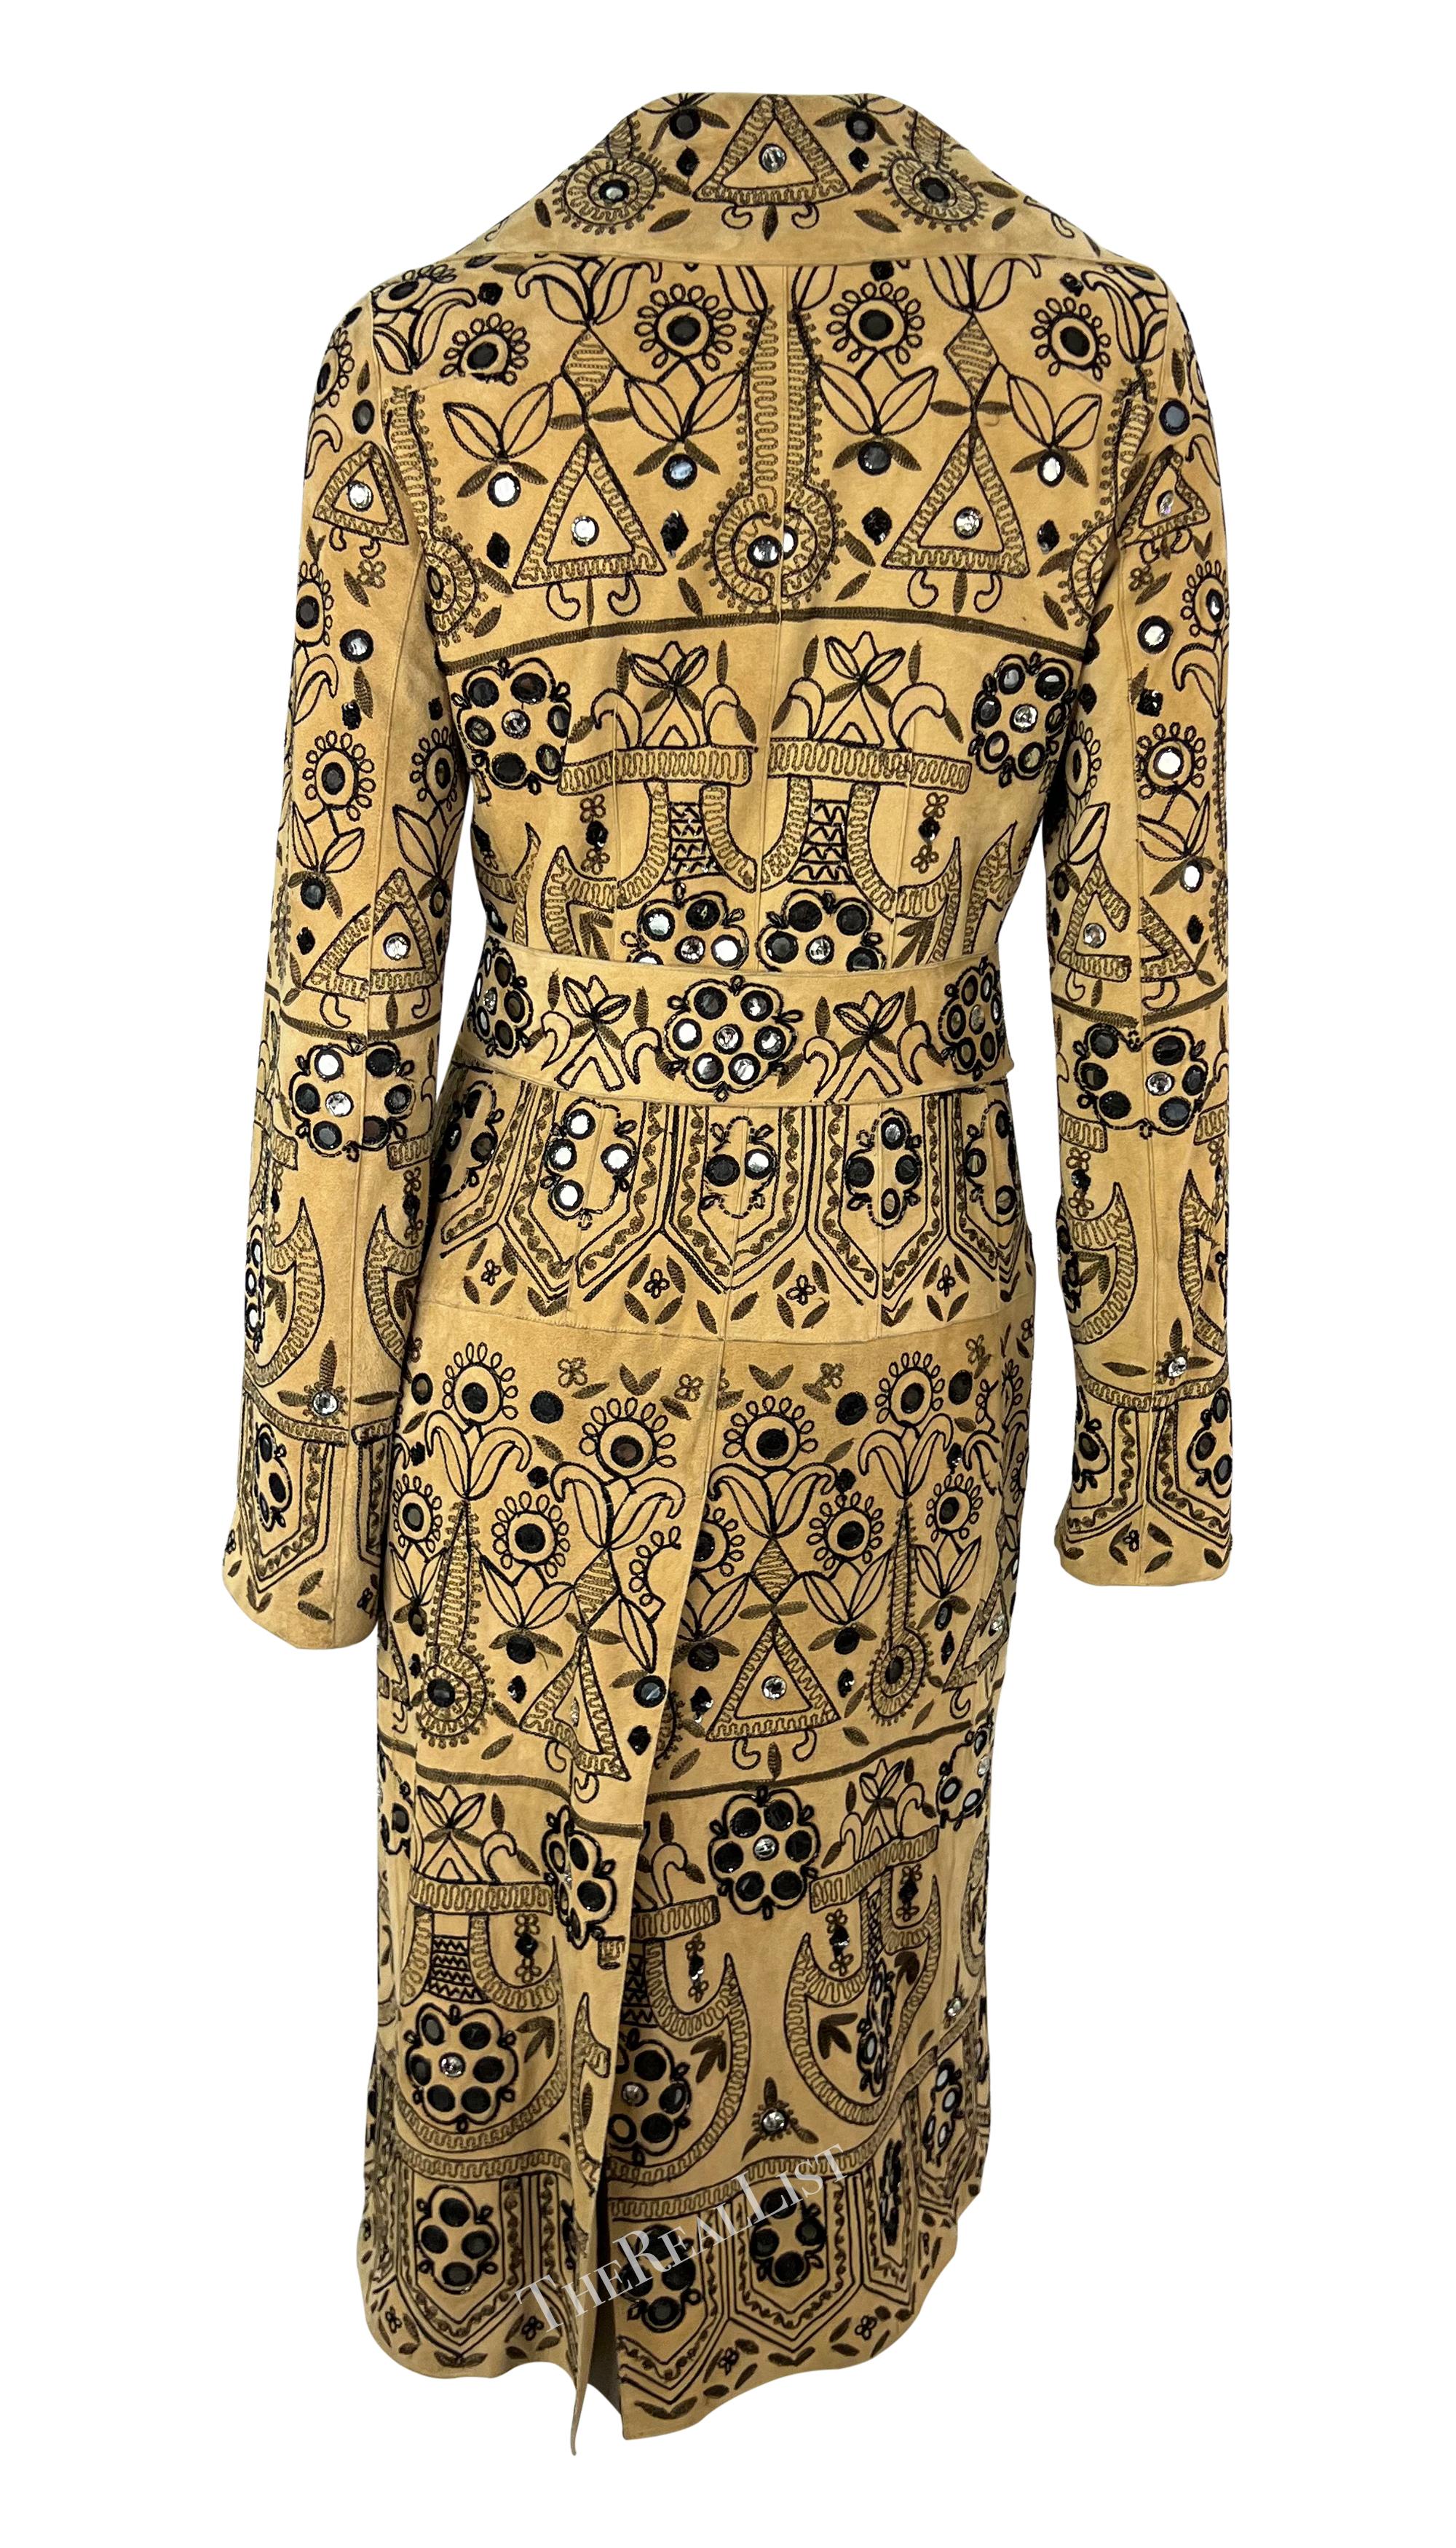 S/S 2001 Dolce & Gabbana Tan Suede Rhinestone Mirror Embroidered Trench Coat For Sale 3